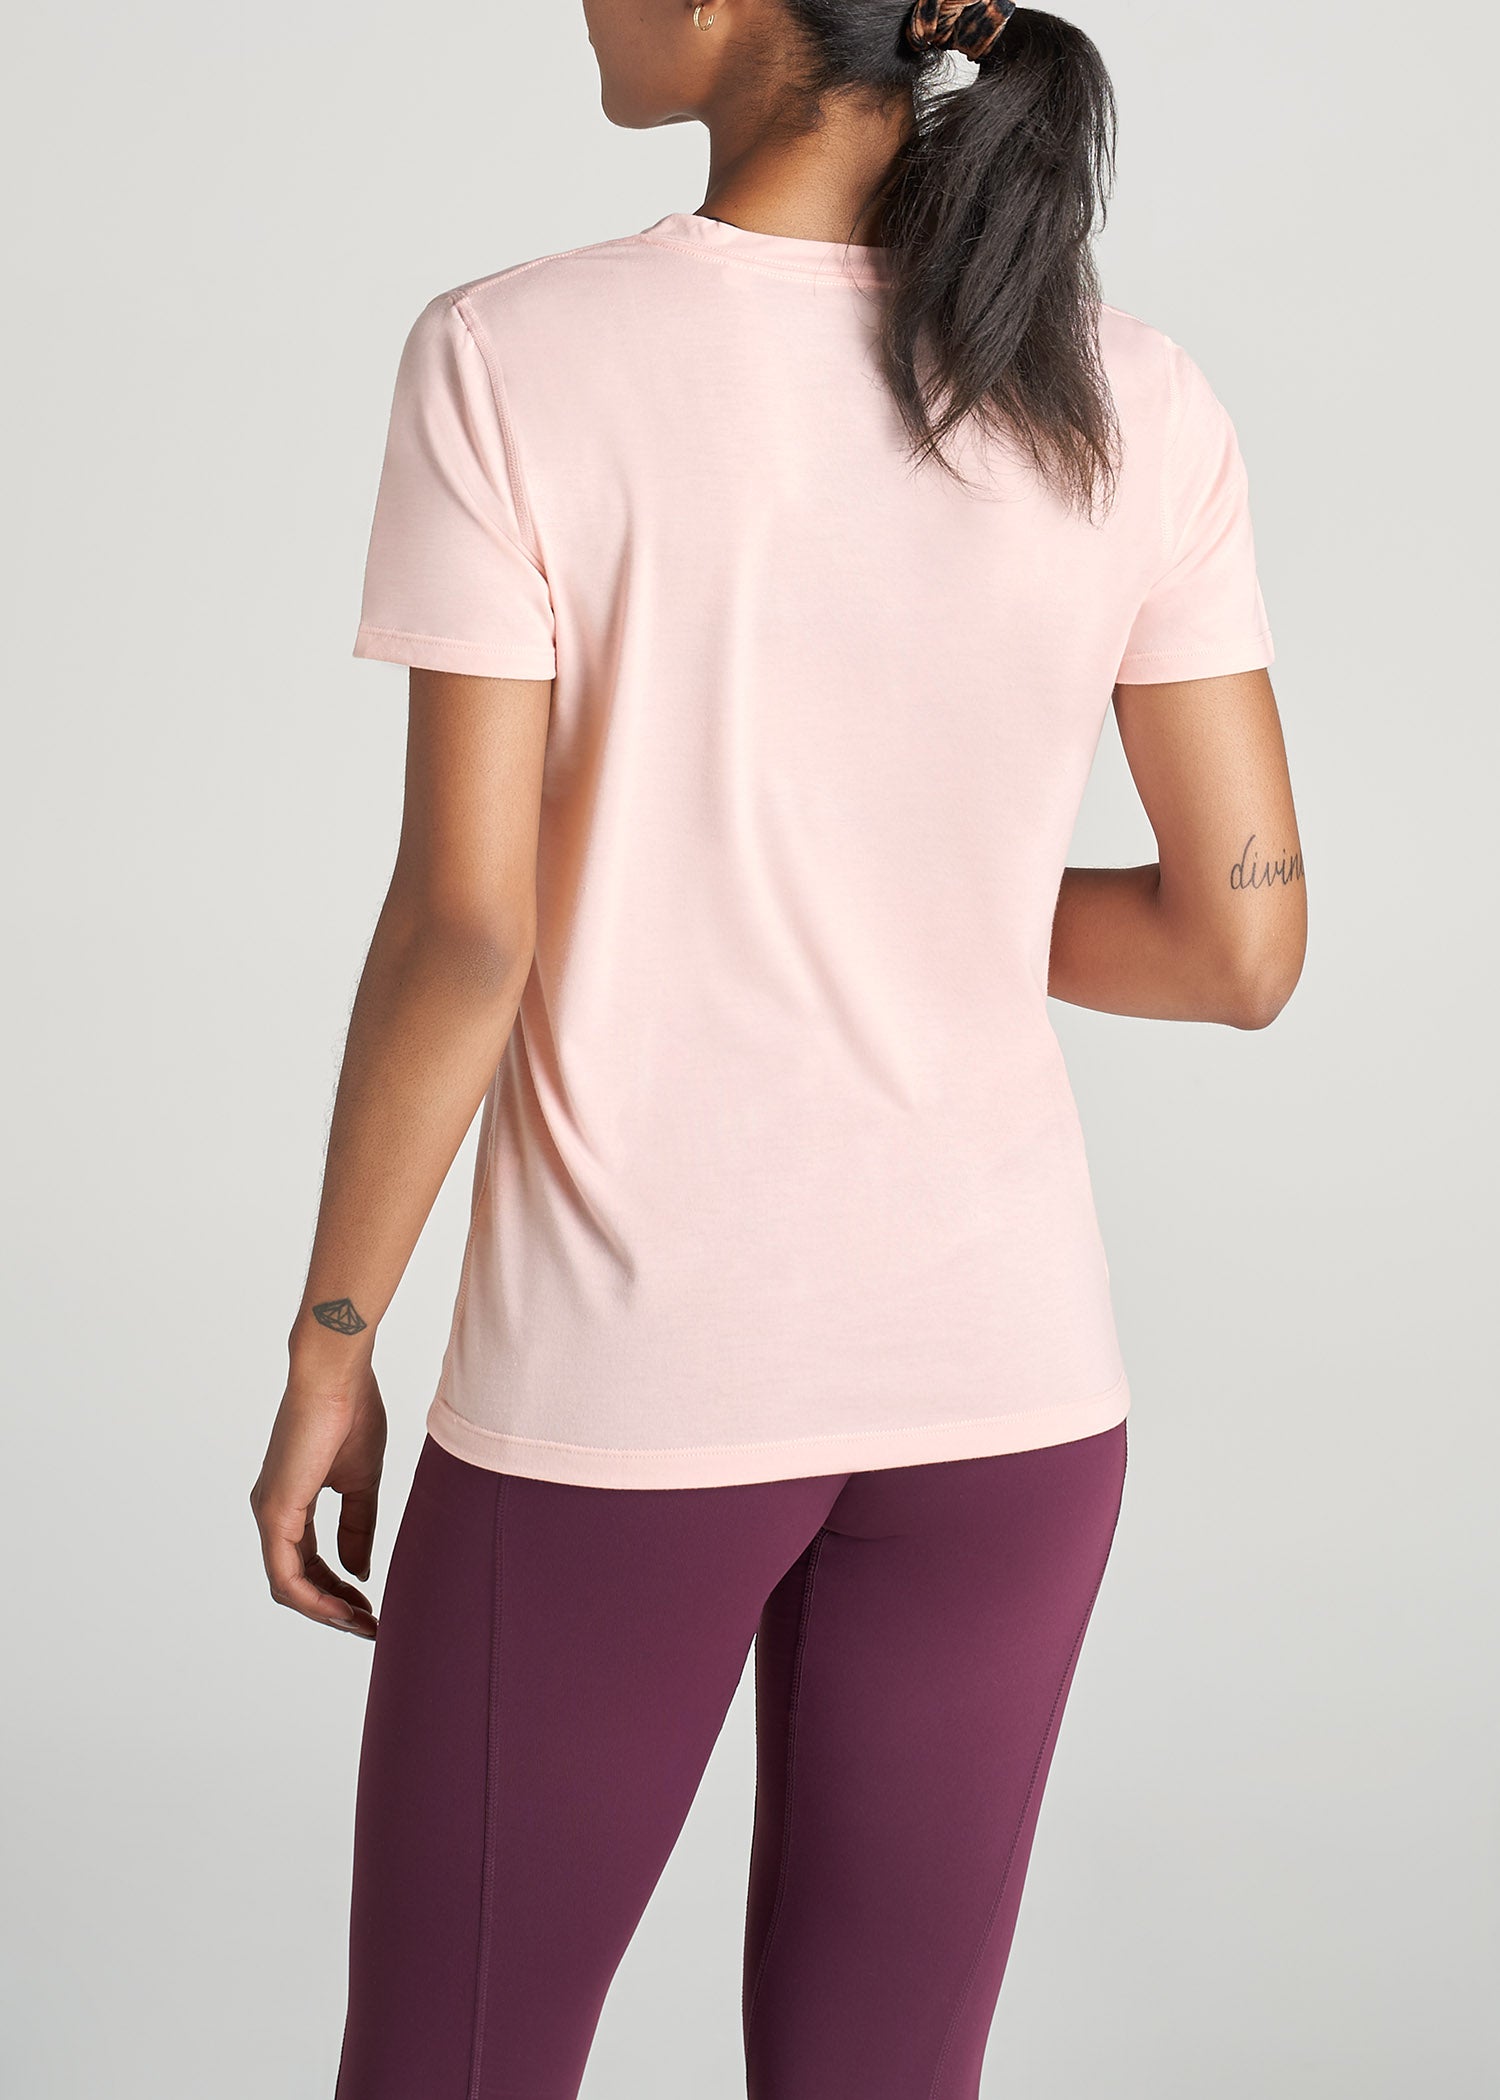 Short Sleeve V-Neck in Sweet Pink - Shirts for Tall Women